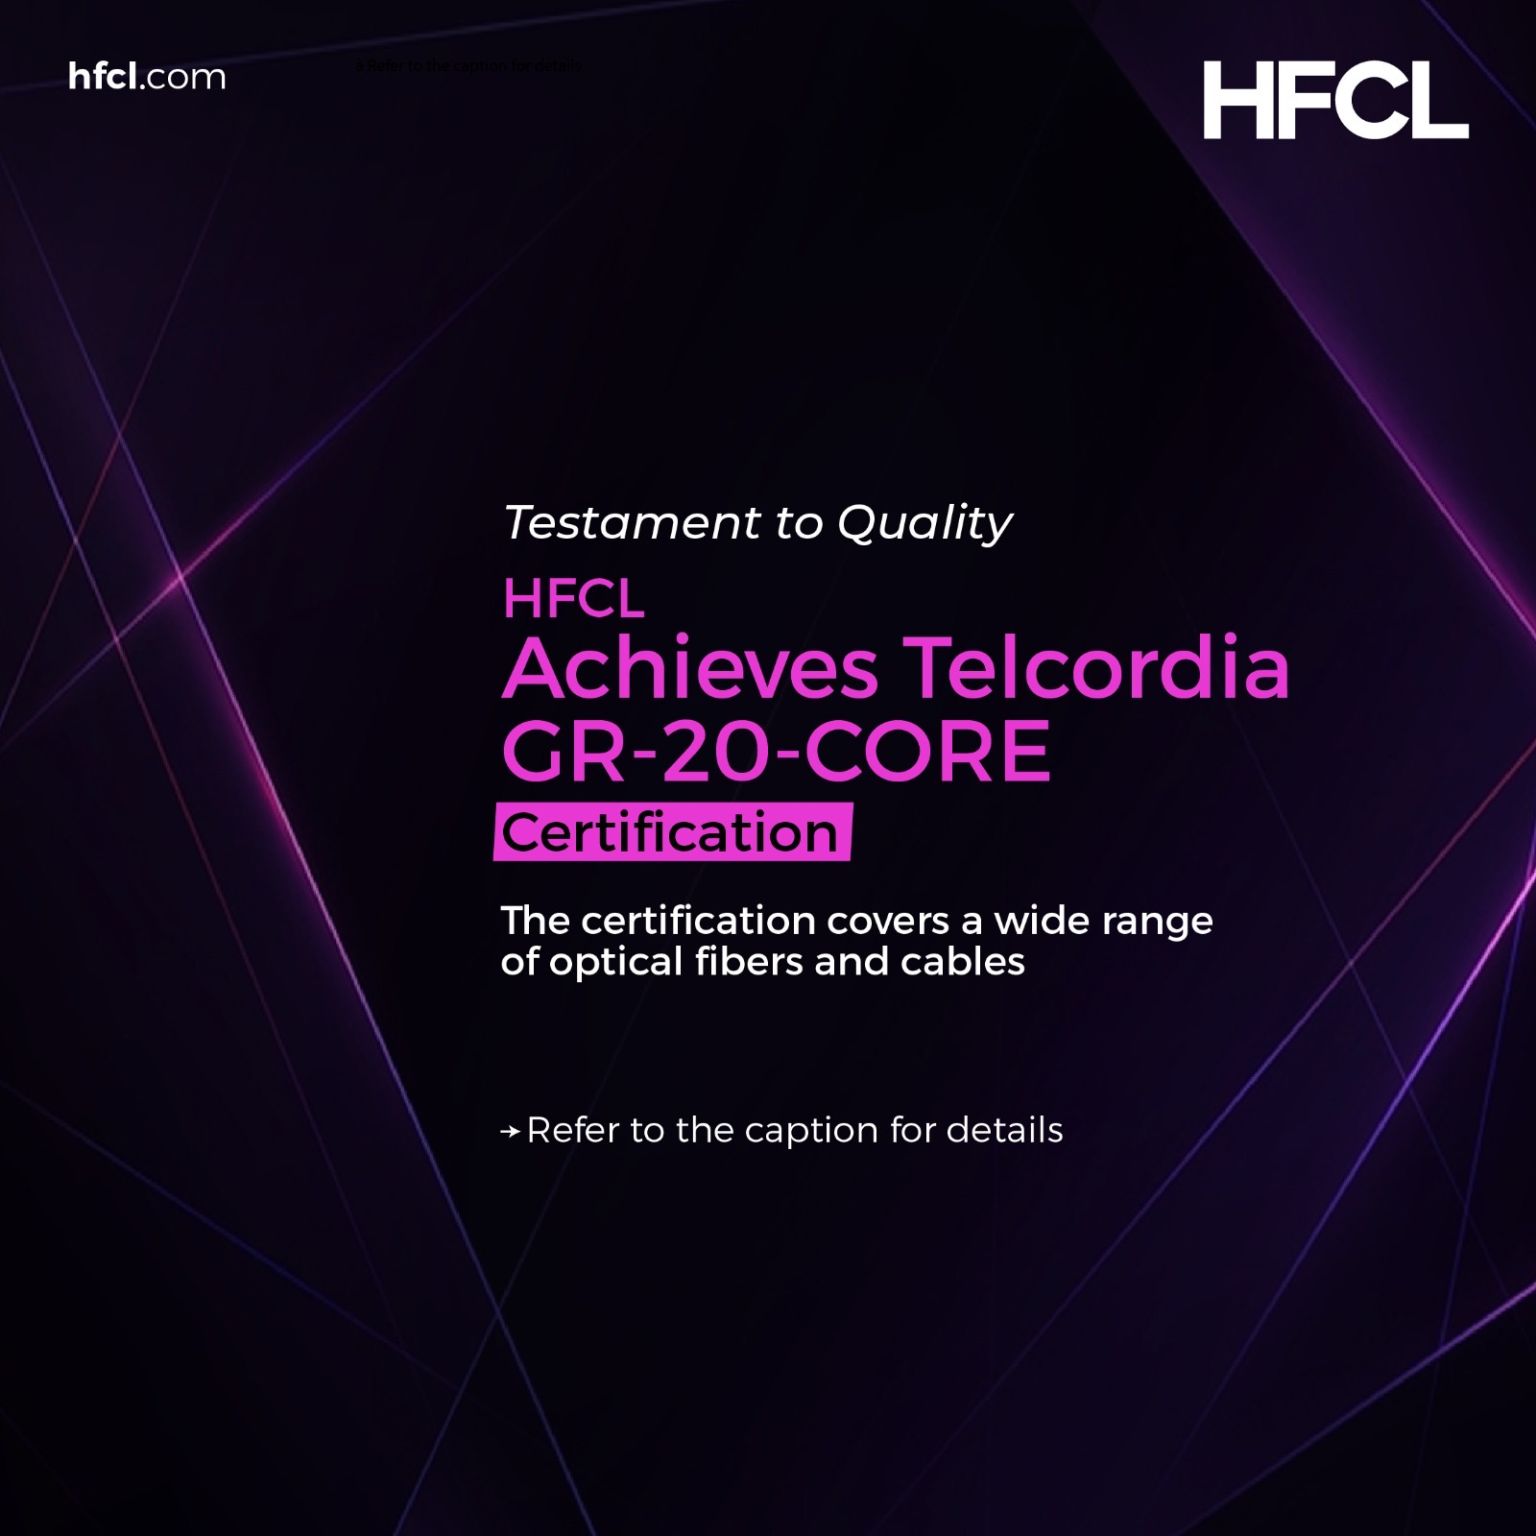 HFCL receives Telecordia GR-20-CORE Certification